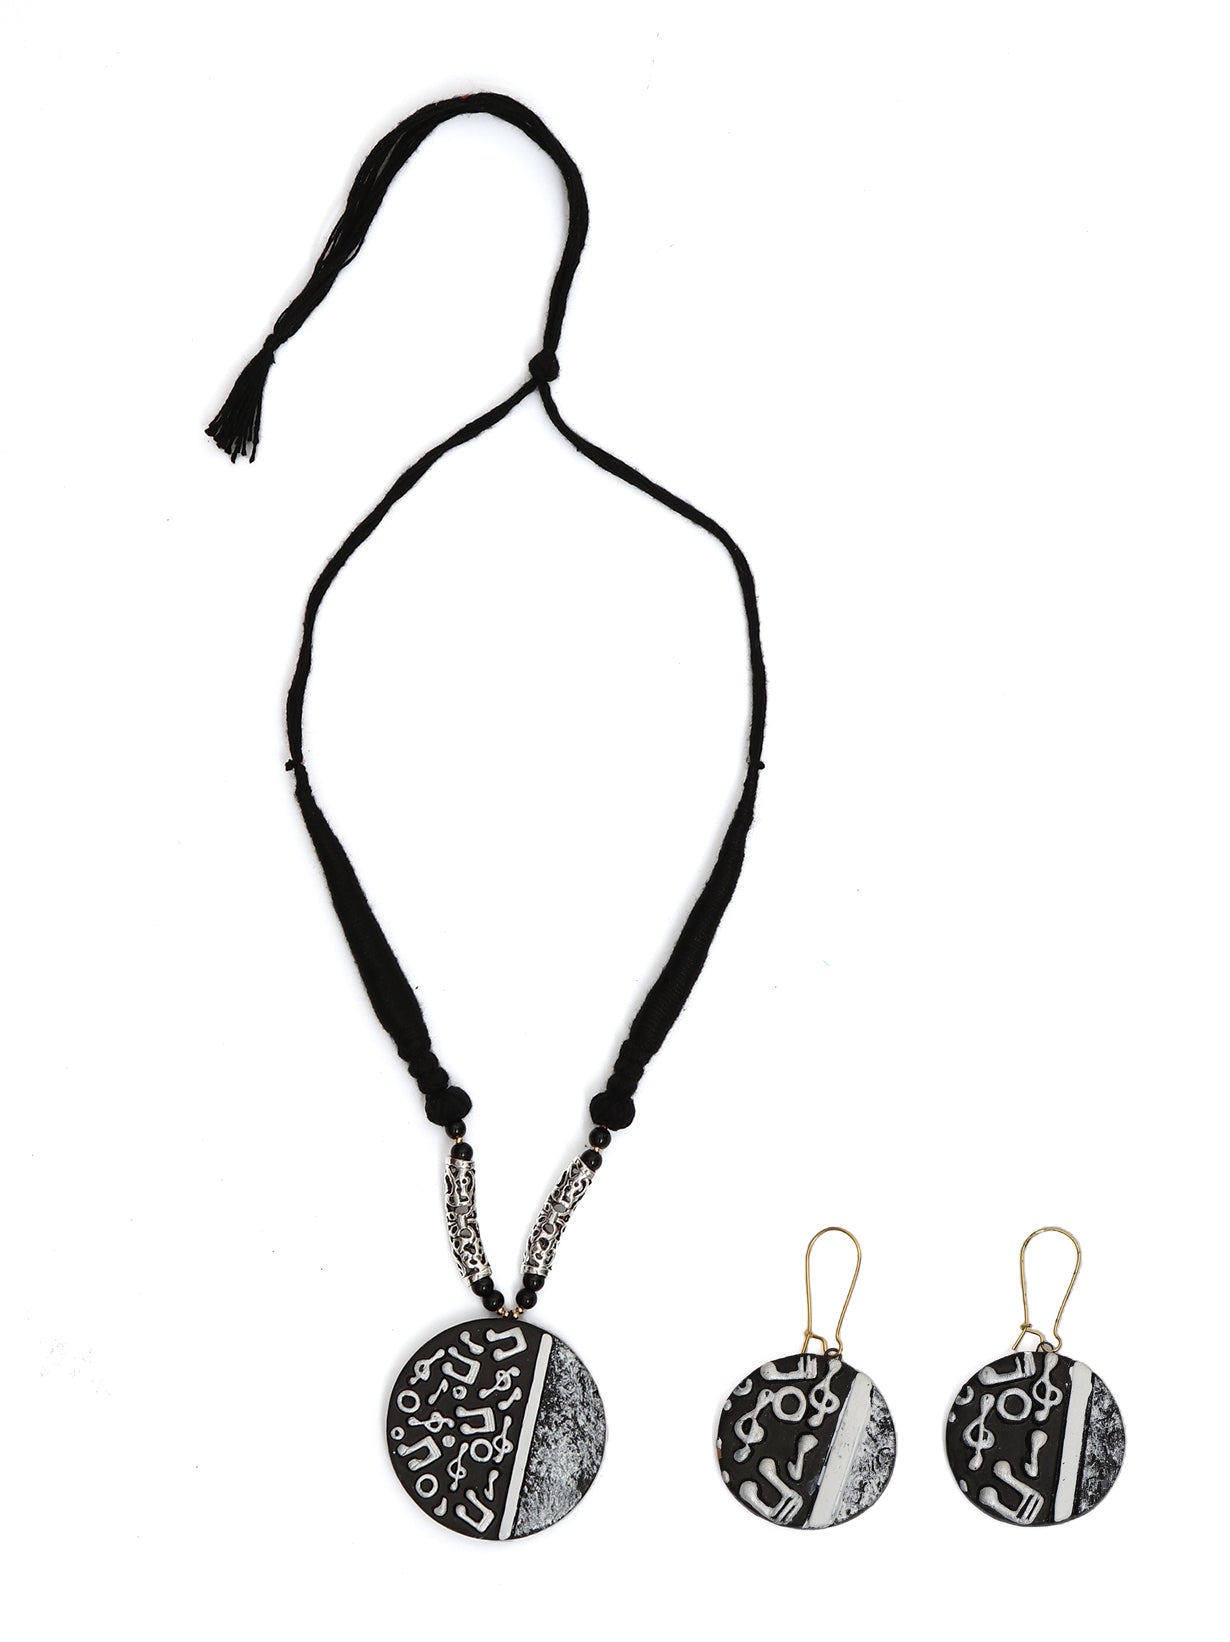 Musical Notes Handcrafted Terracotta Clay Necklace Set with Thread Closure